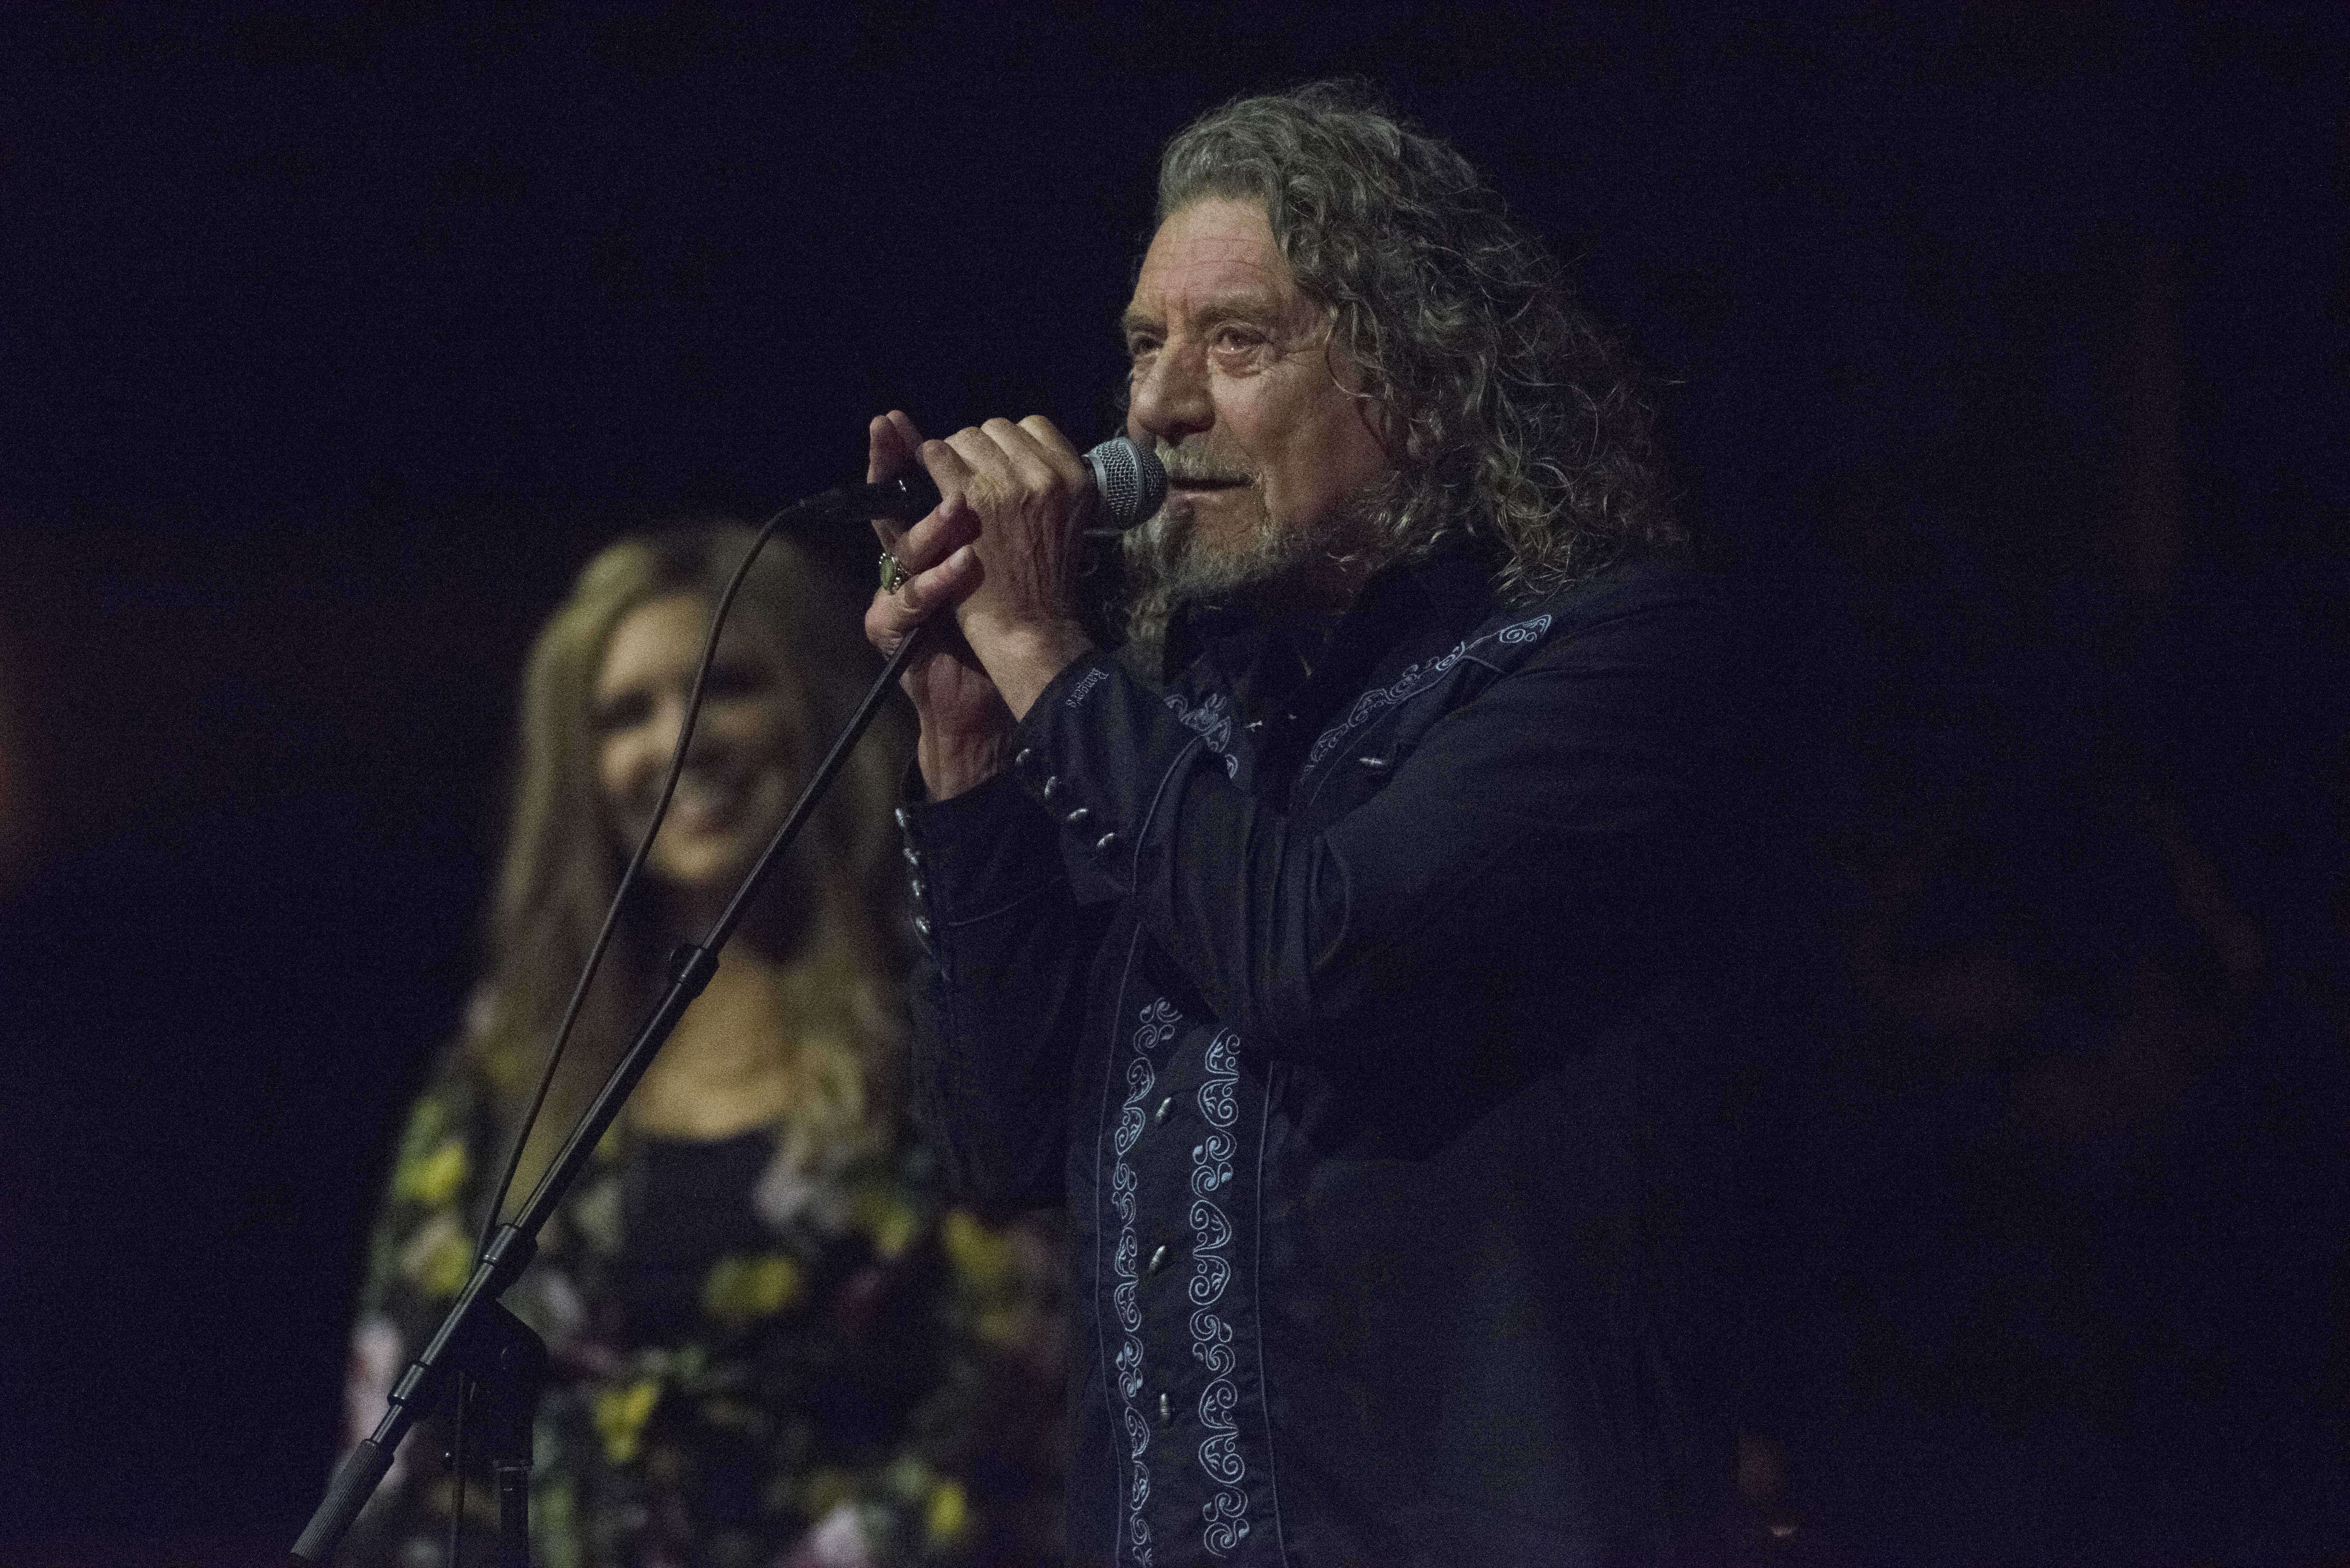 duo of Alison and Robert Plant continue to delight CMAC show (review, photos) -